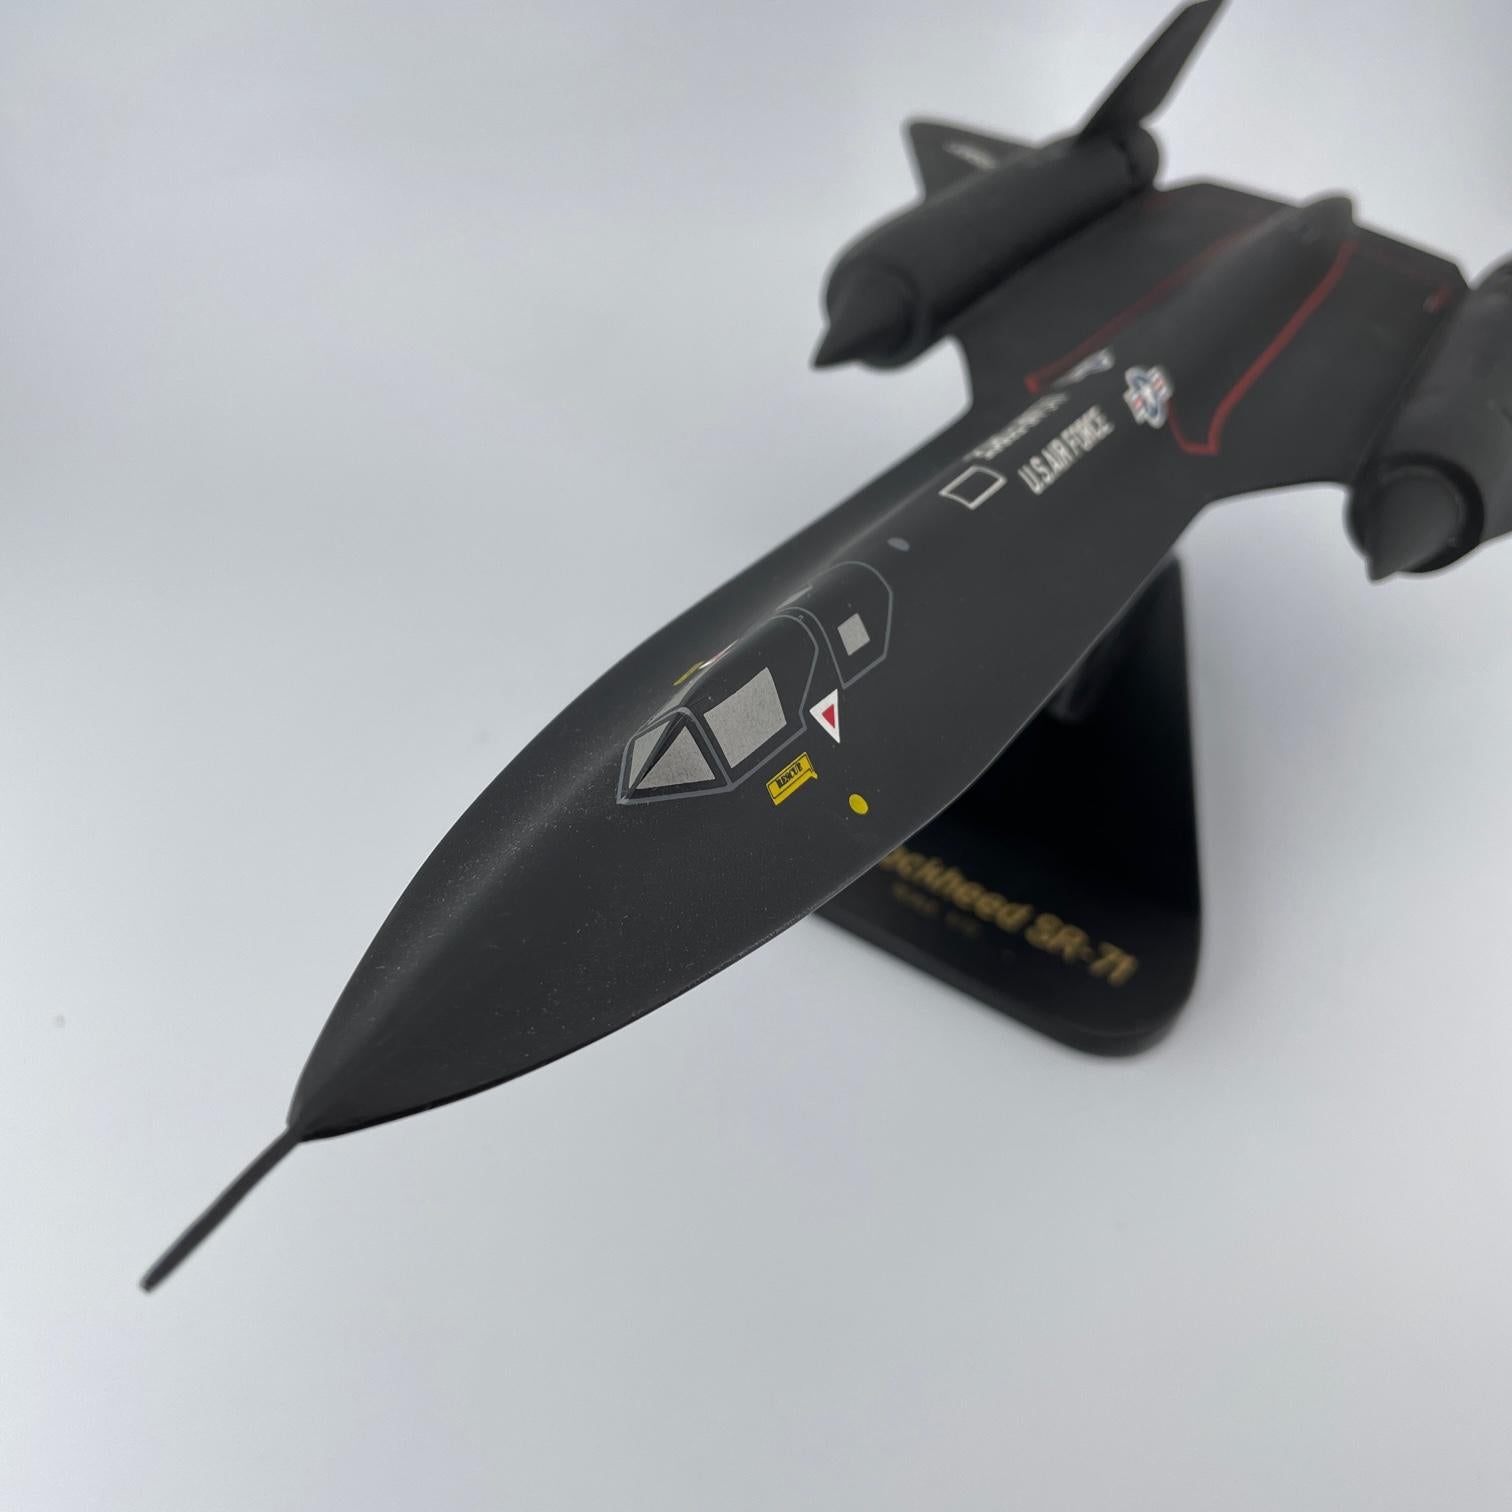 A vintage 1980s large desktop 1/72 scale model of the fastest plane in the world, at that time, the SR-71 Blackbird. This model is 18 inches long on wooden base.